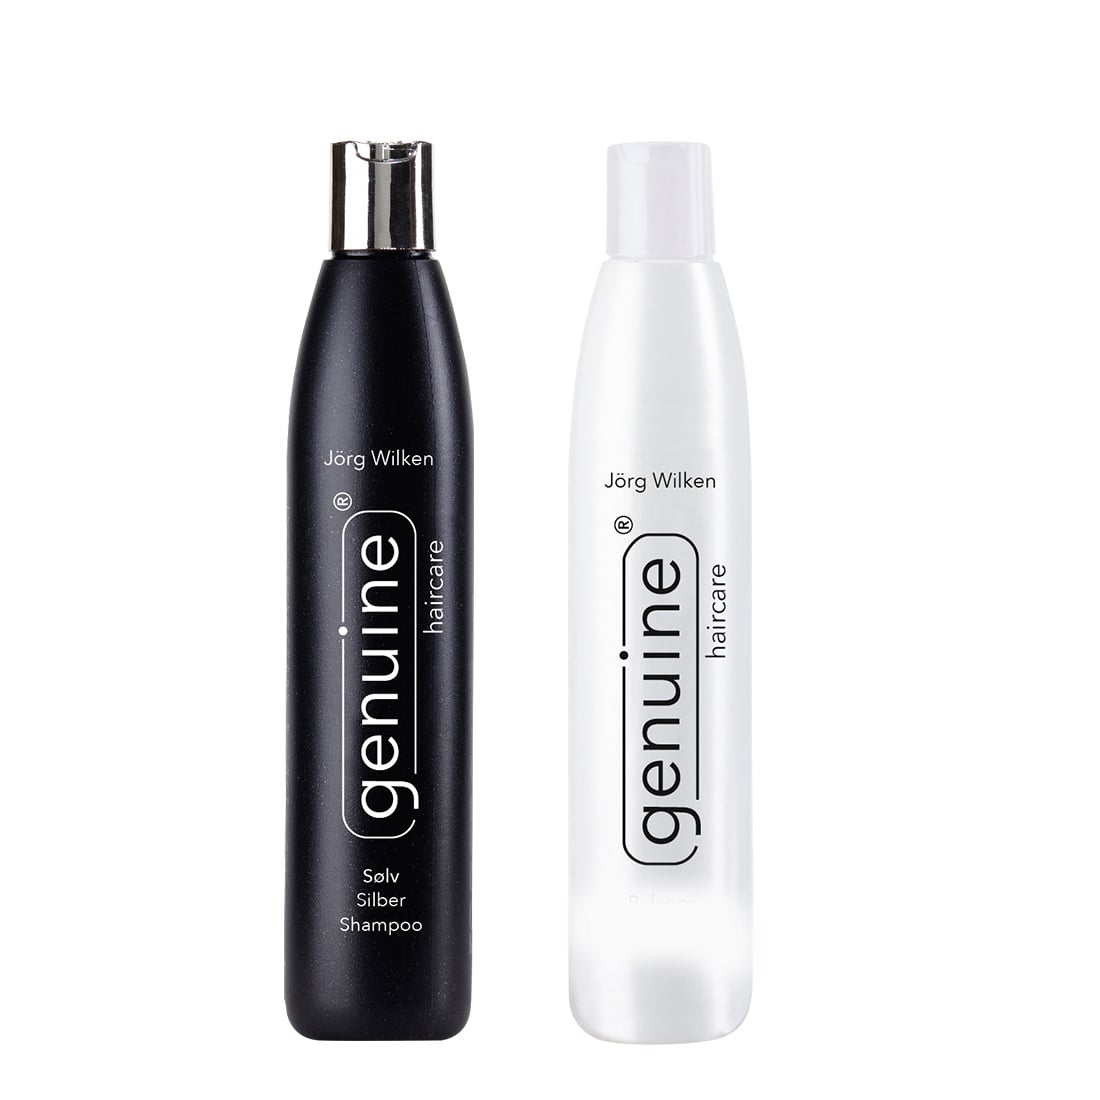 Blond Duo - genuine haircare